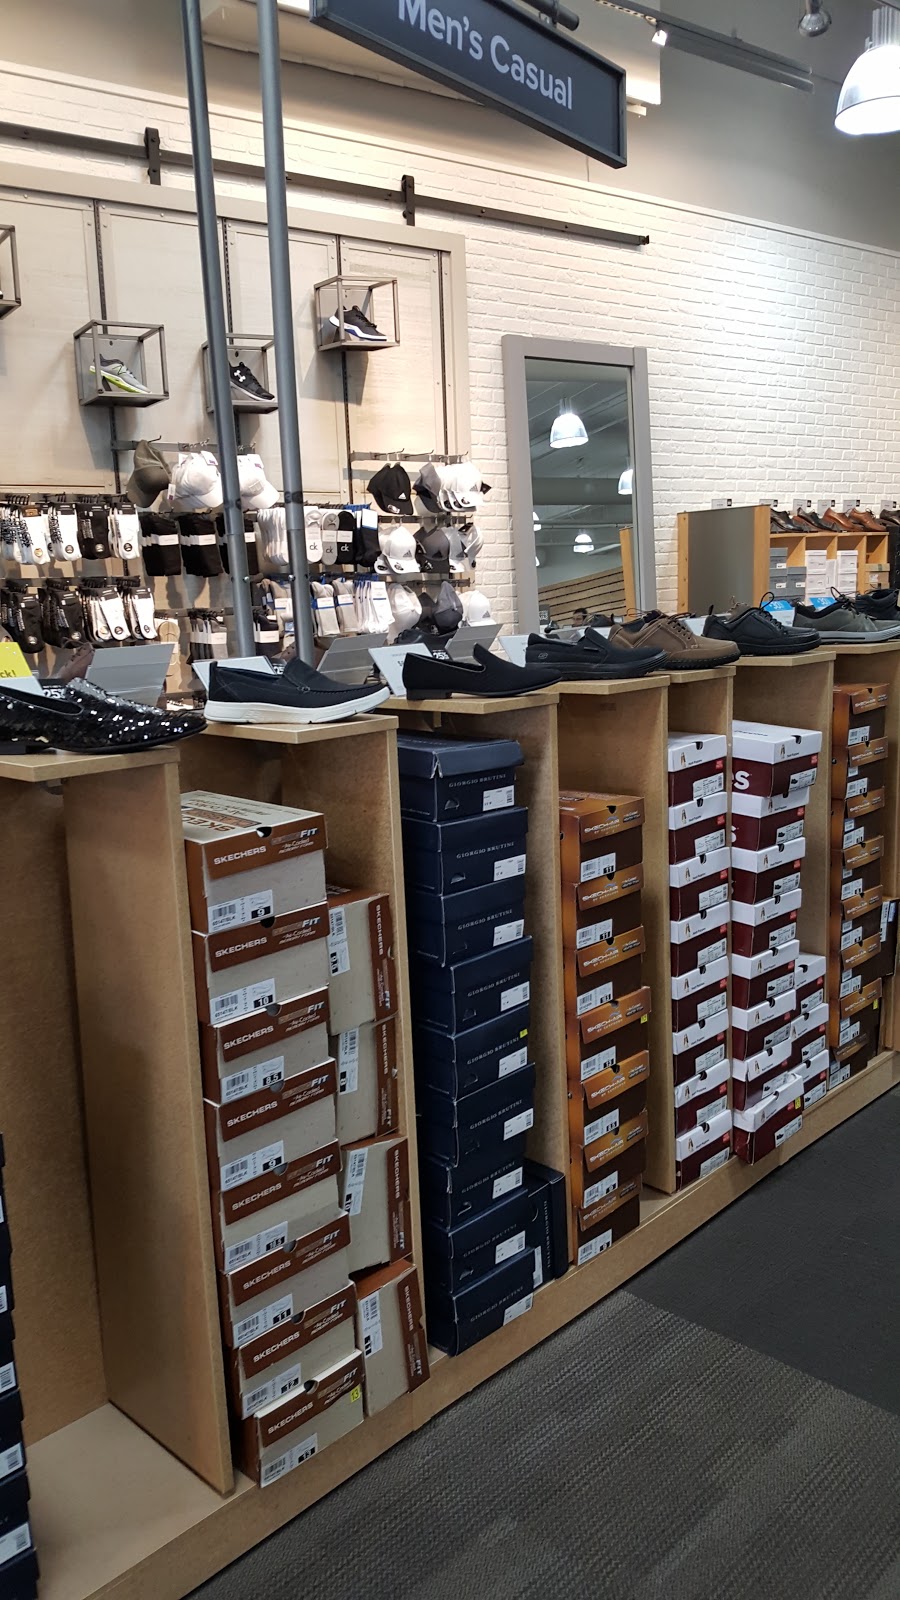 DSW Designer Shoe Warehouse | shoe store | 805 Cloverdale Ave #100, Victoria, BC V8X 2S9, Canada | 2504125693 OR +1 250-412-5693